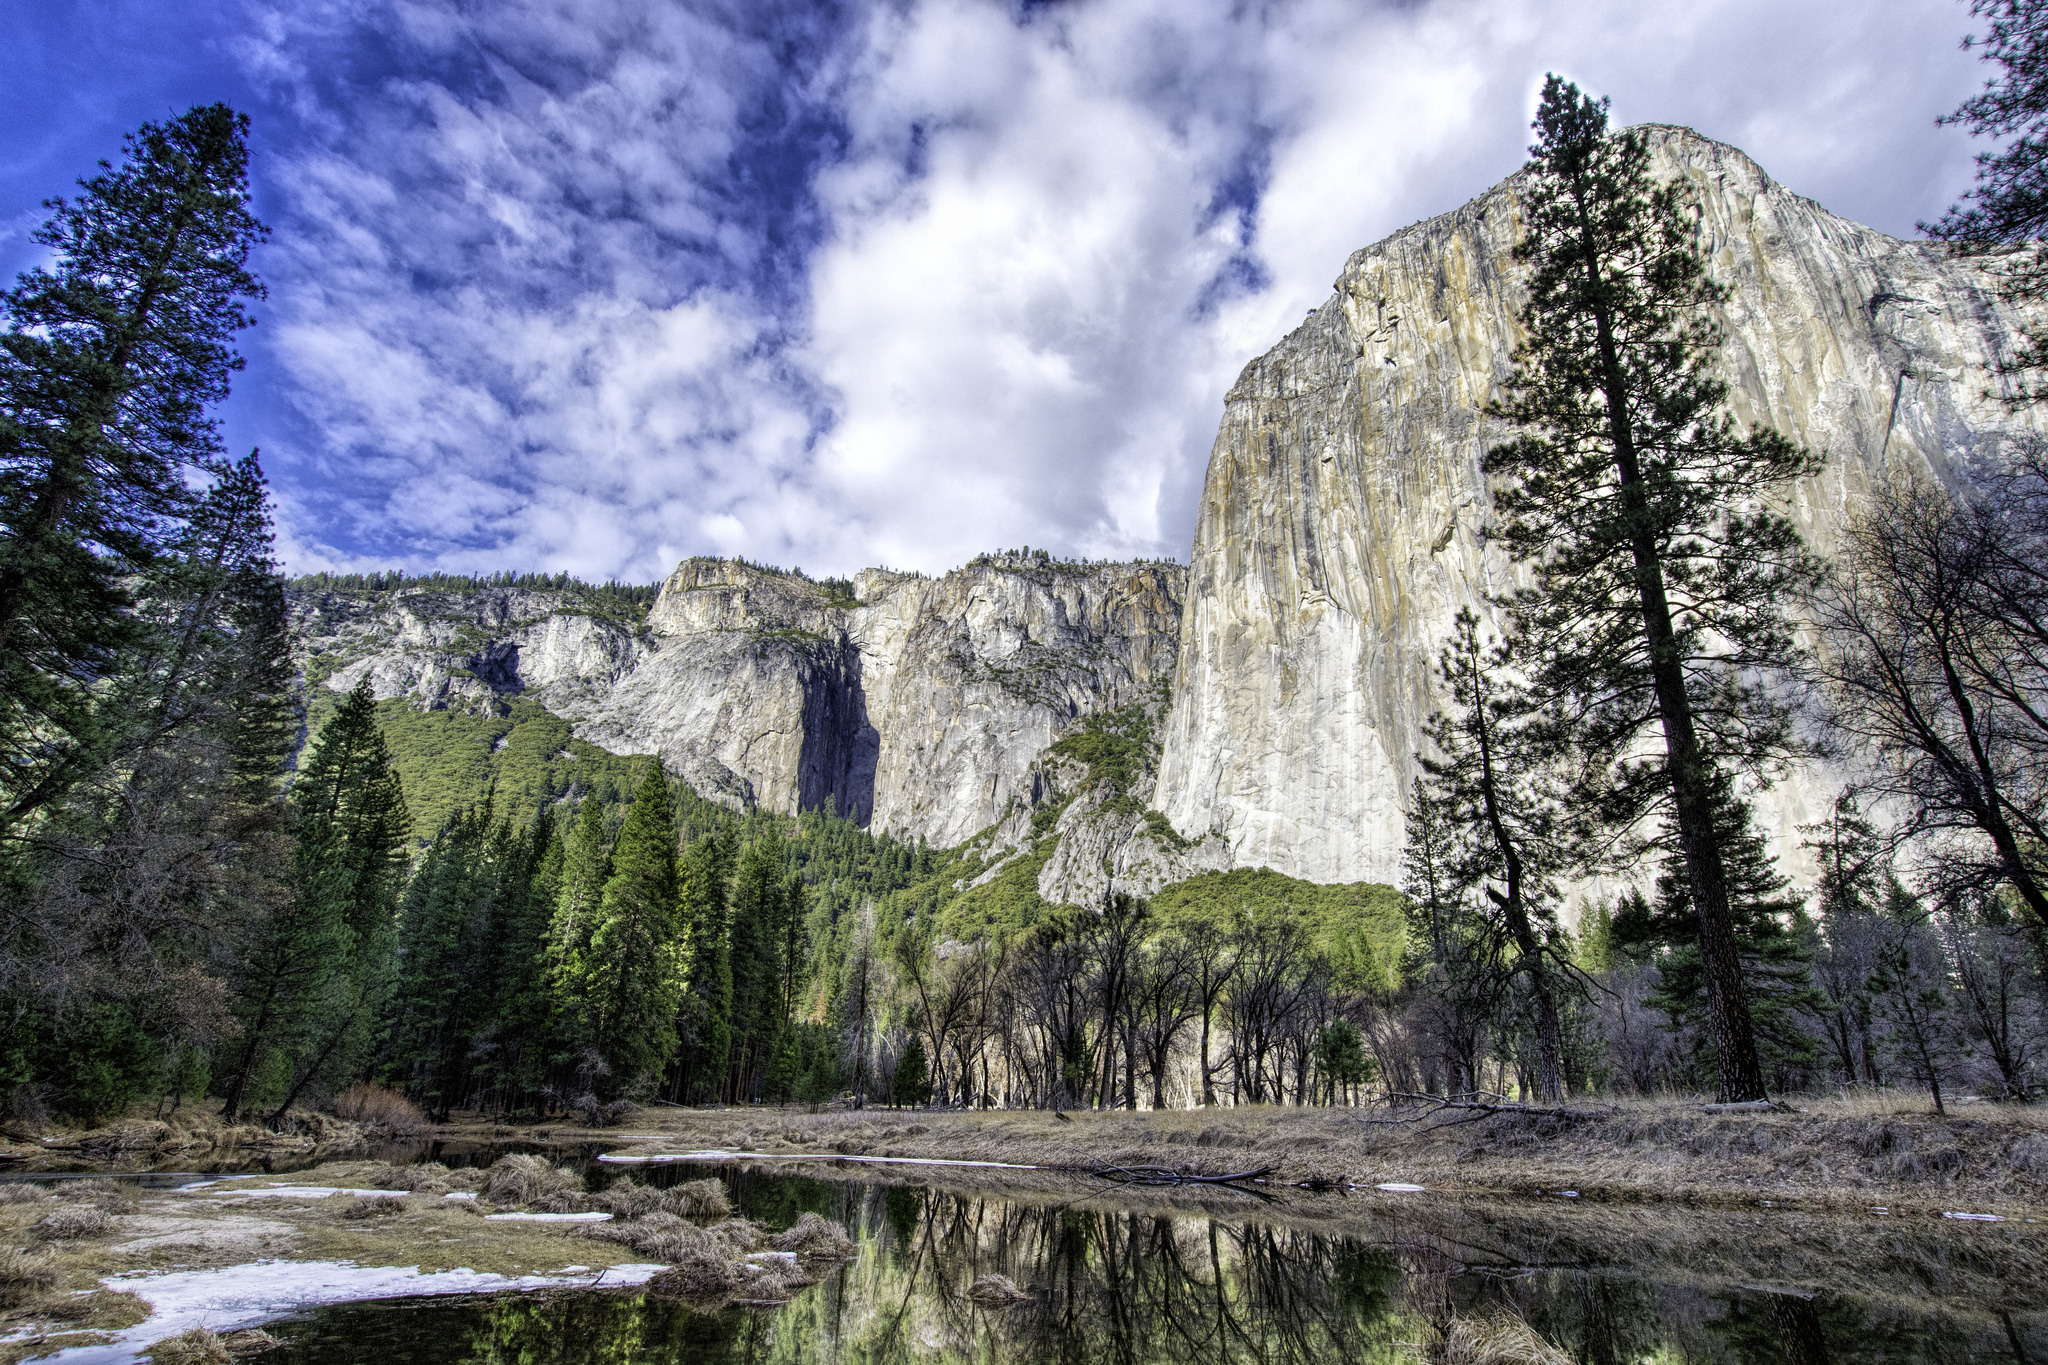 earth, yosemite national park, california, cliff, forest, mountain, nature, river, tree, usa, national park